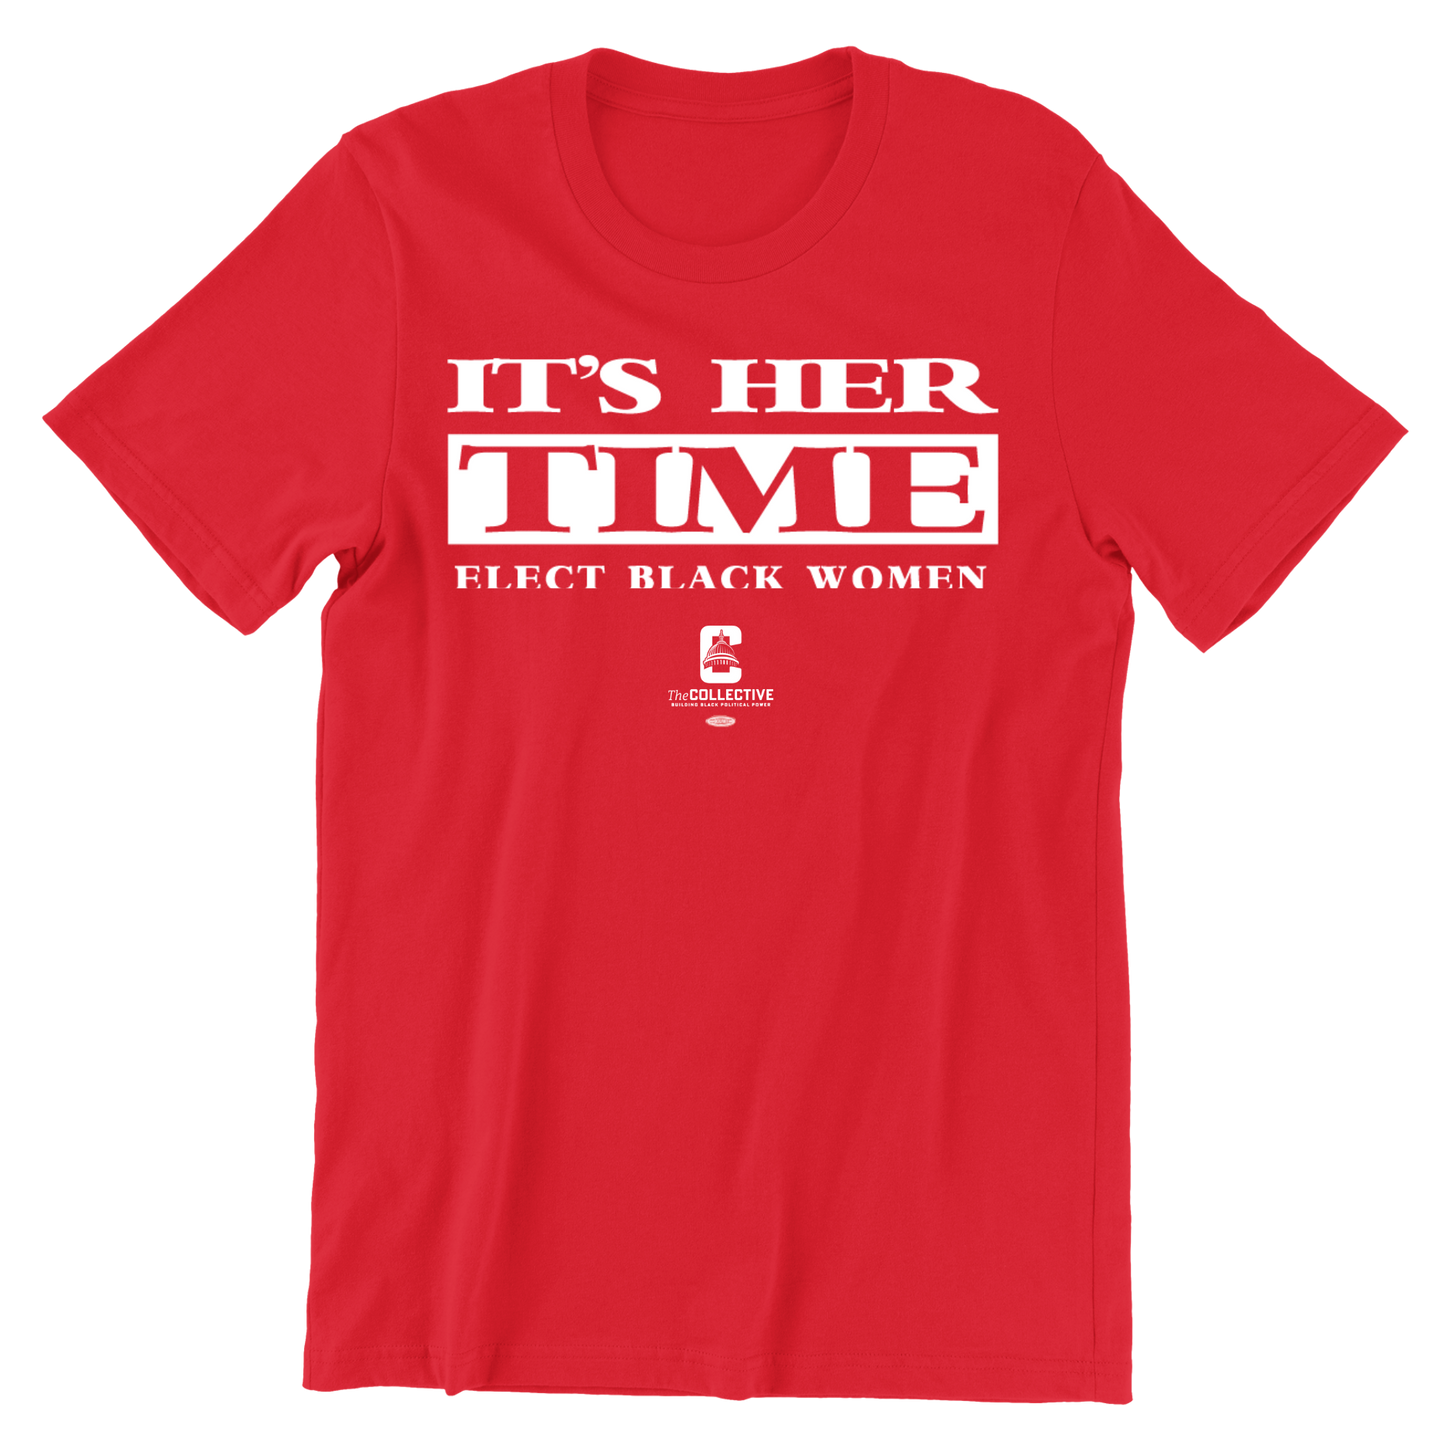 IT'S HER TIME TEE